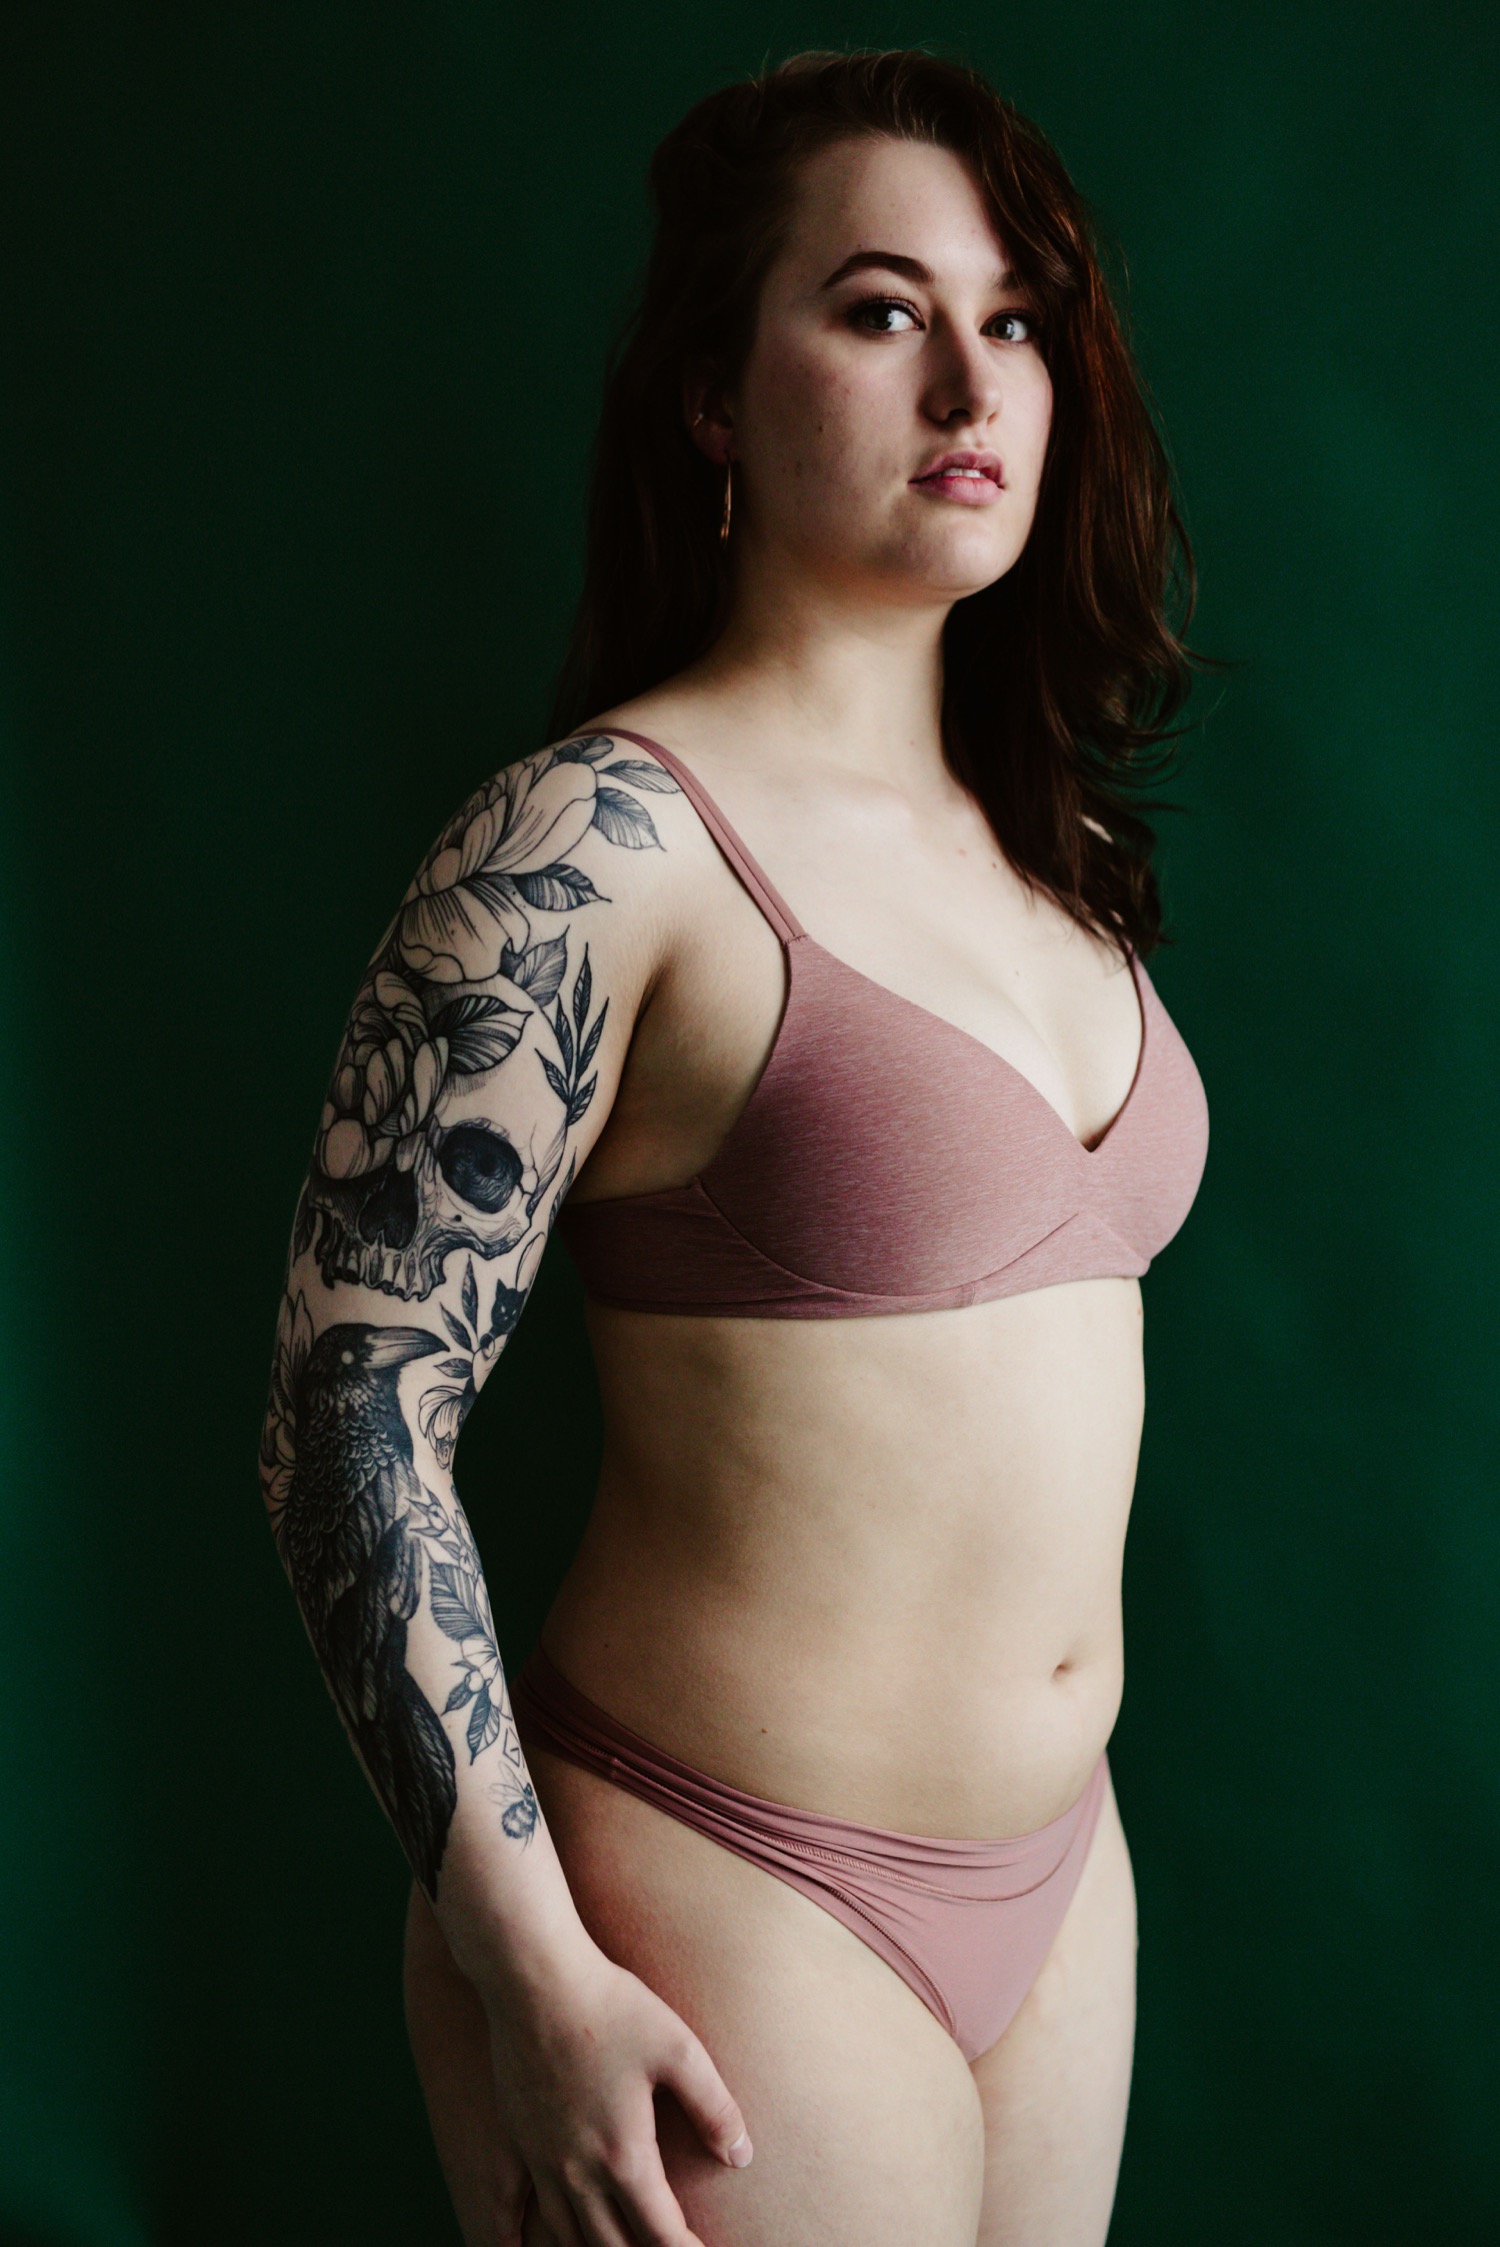 portrait of woman with tattoos looking strong